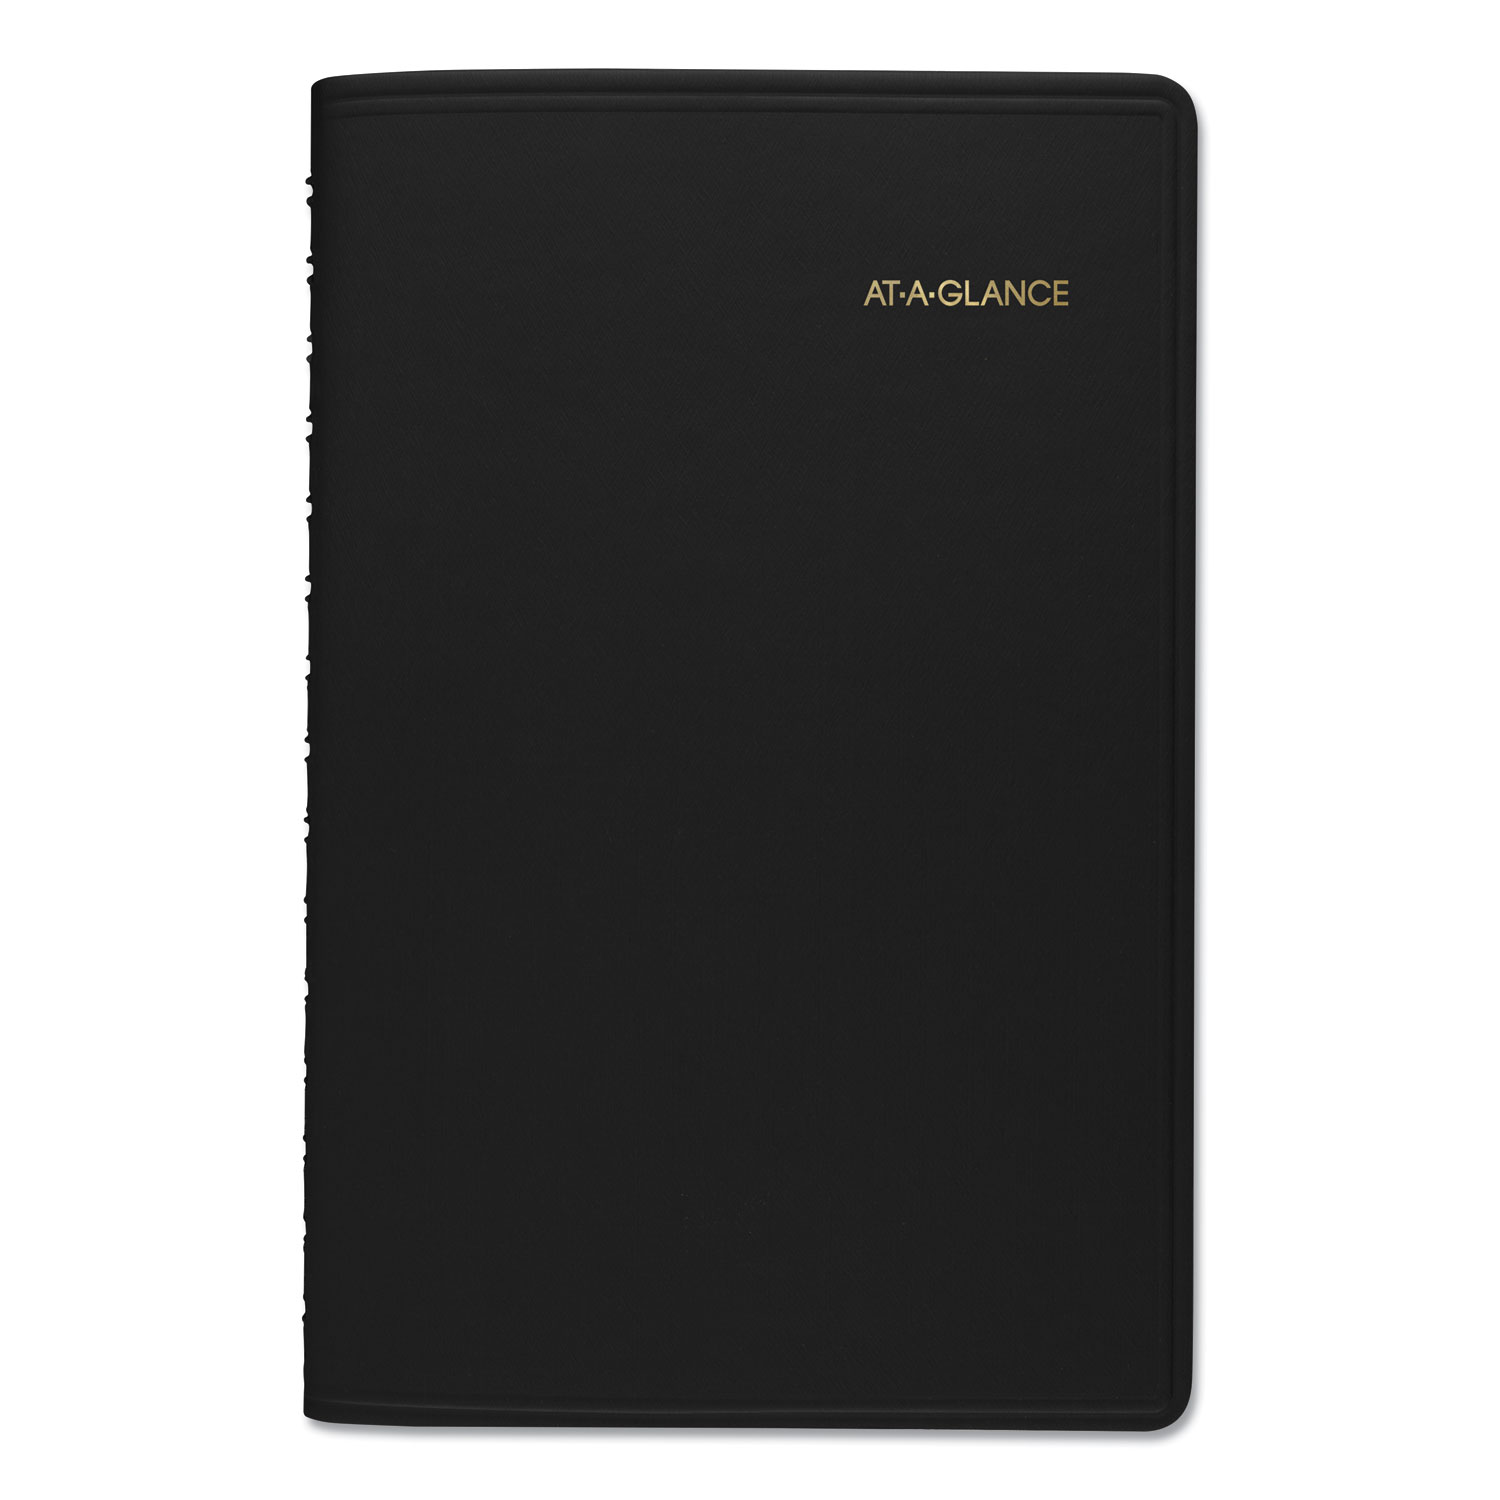 DAILY APPOINTMENT BOOK WITH 15-MINUTE APPOINTMENTS, 8 X 5, BLACK, 2021